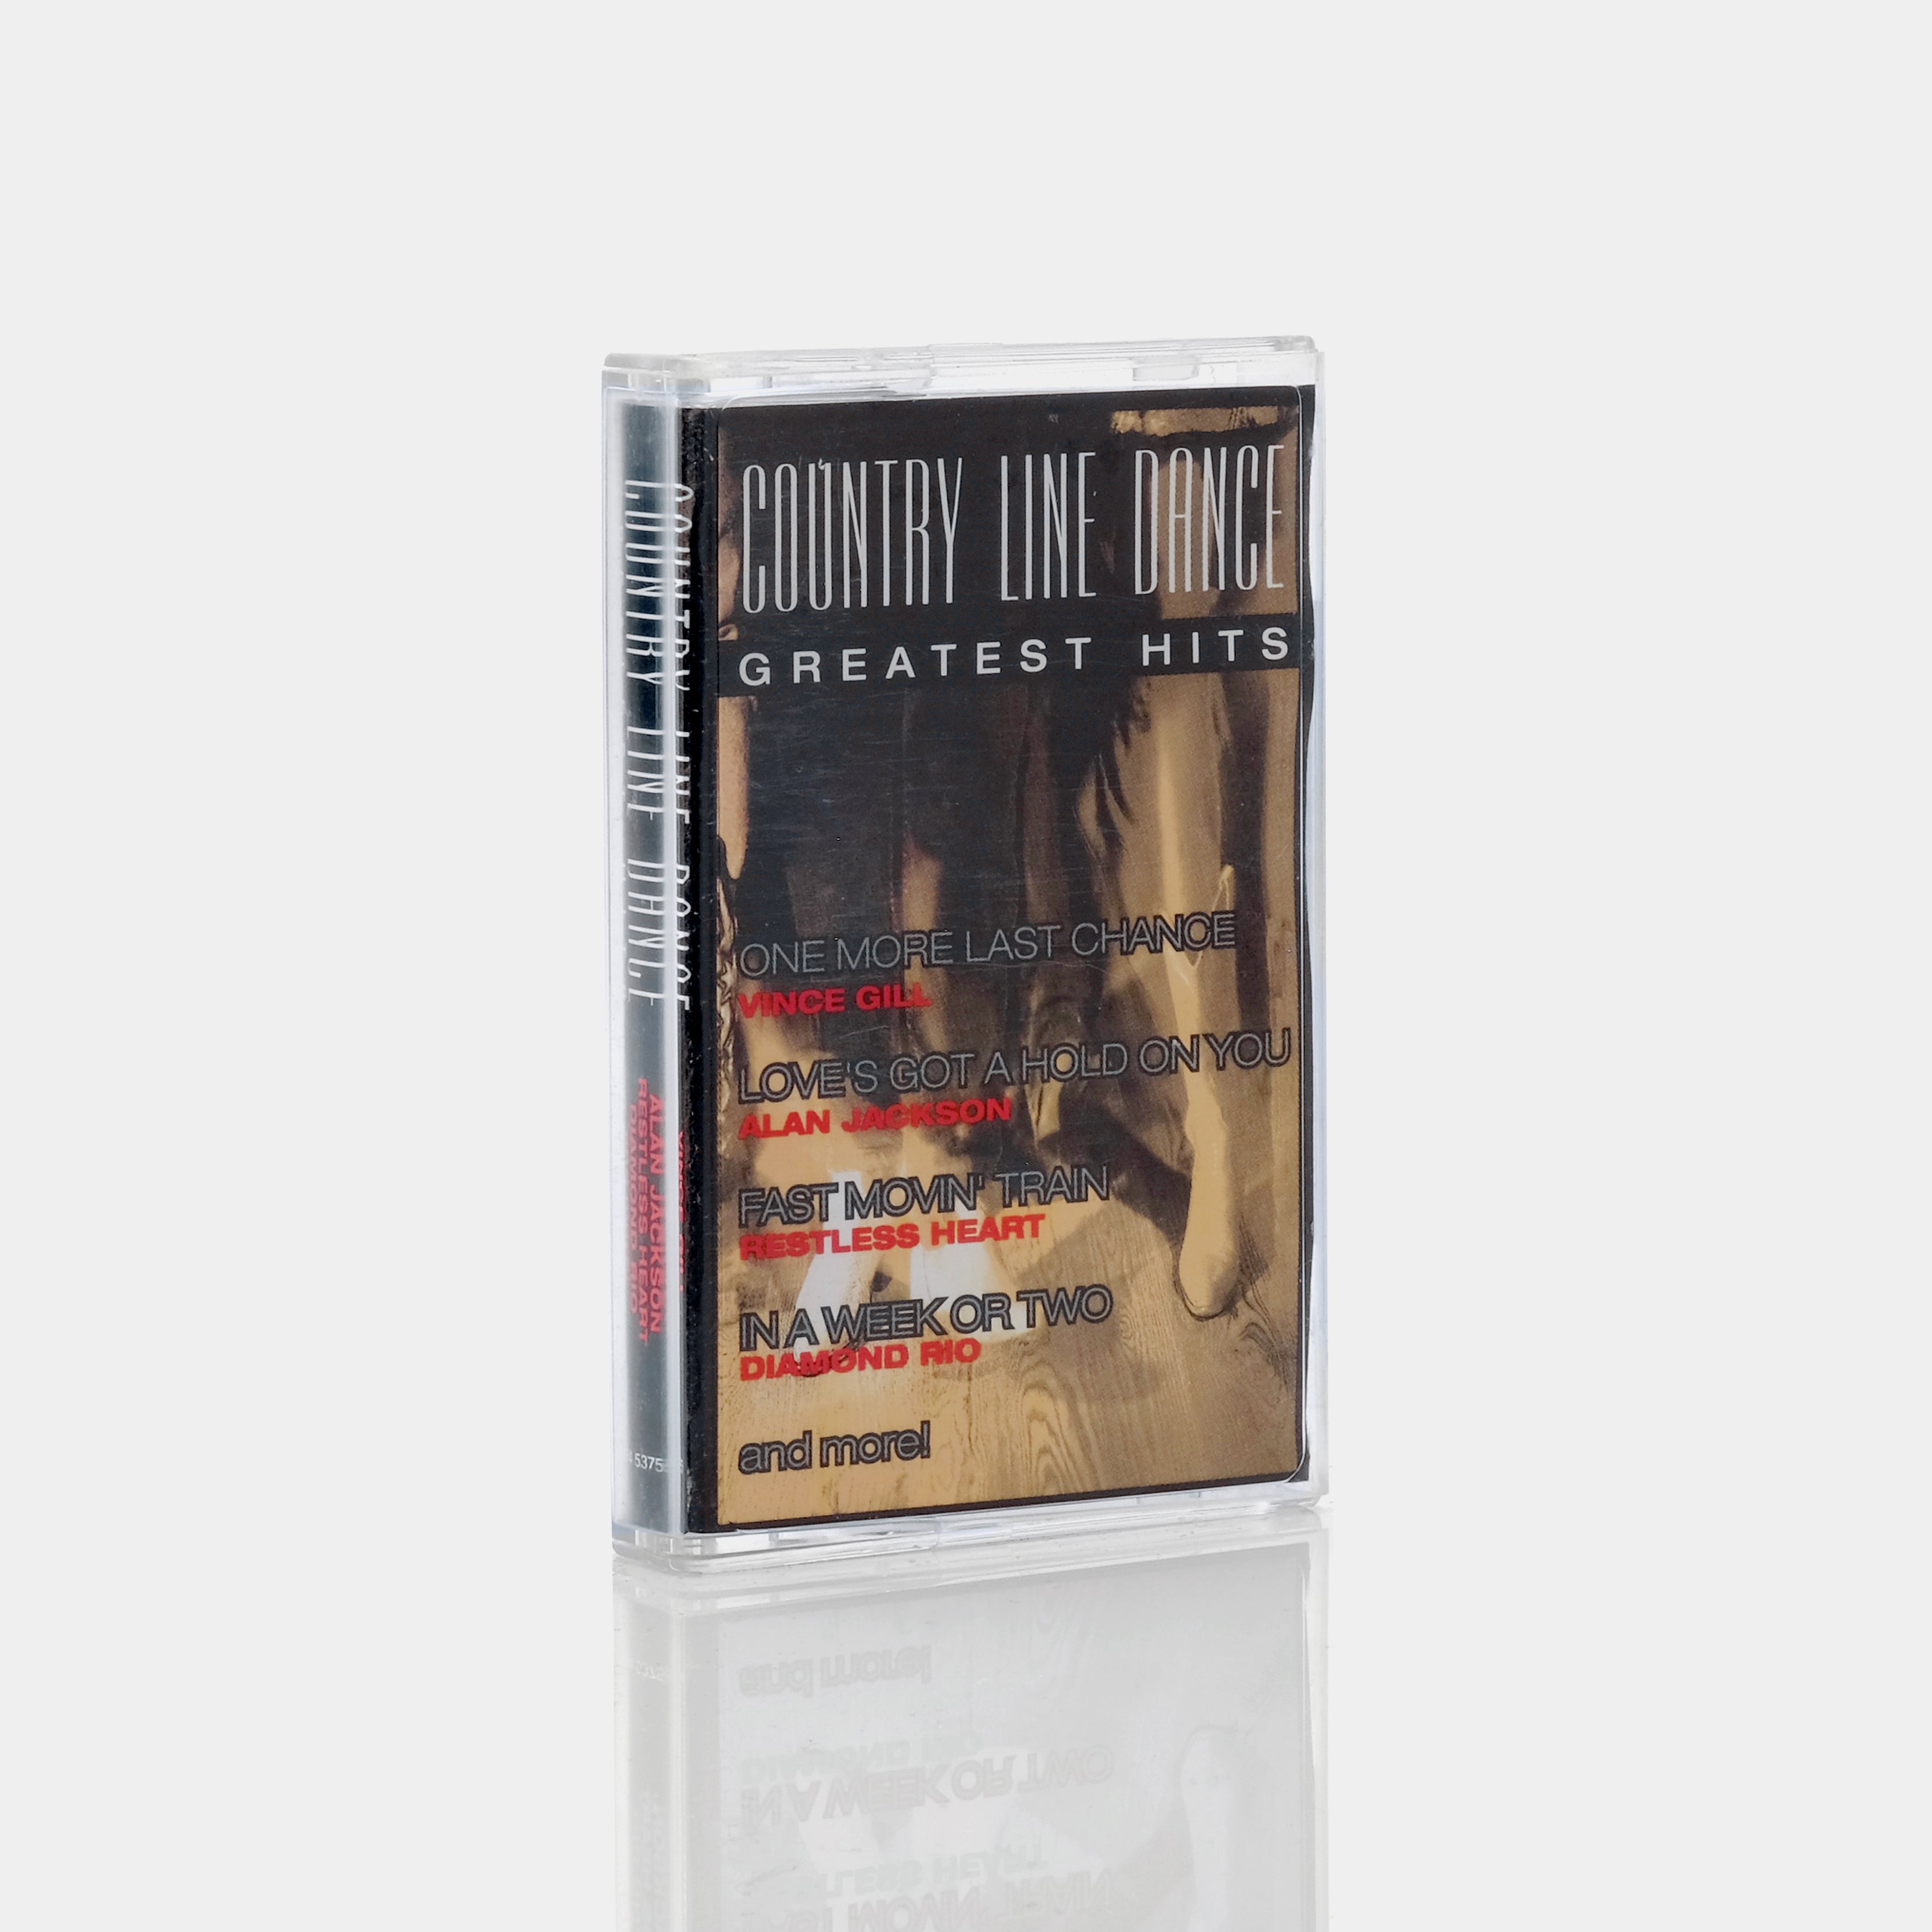 Country Line Dance Greatest Hits Cassette Tape